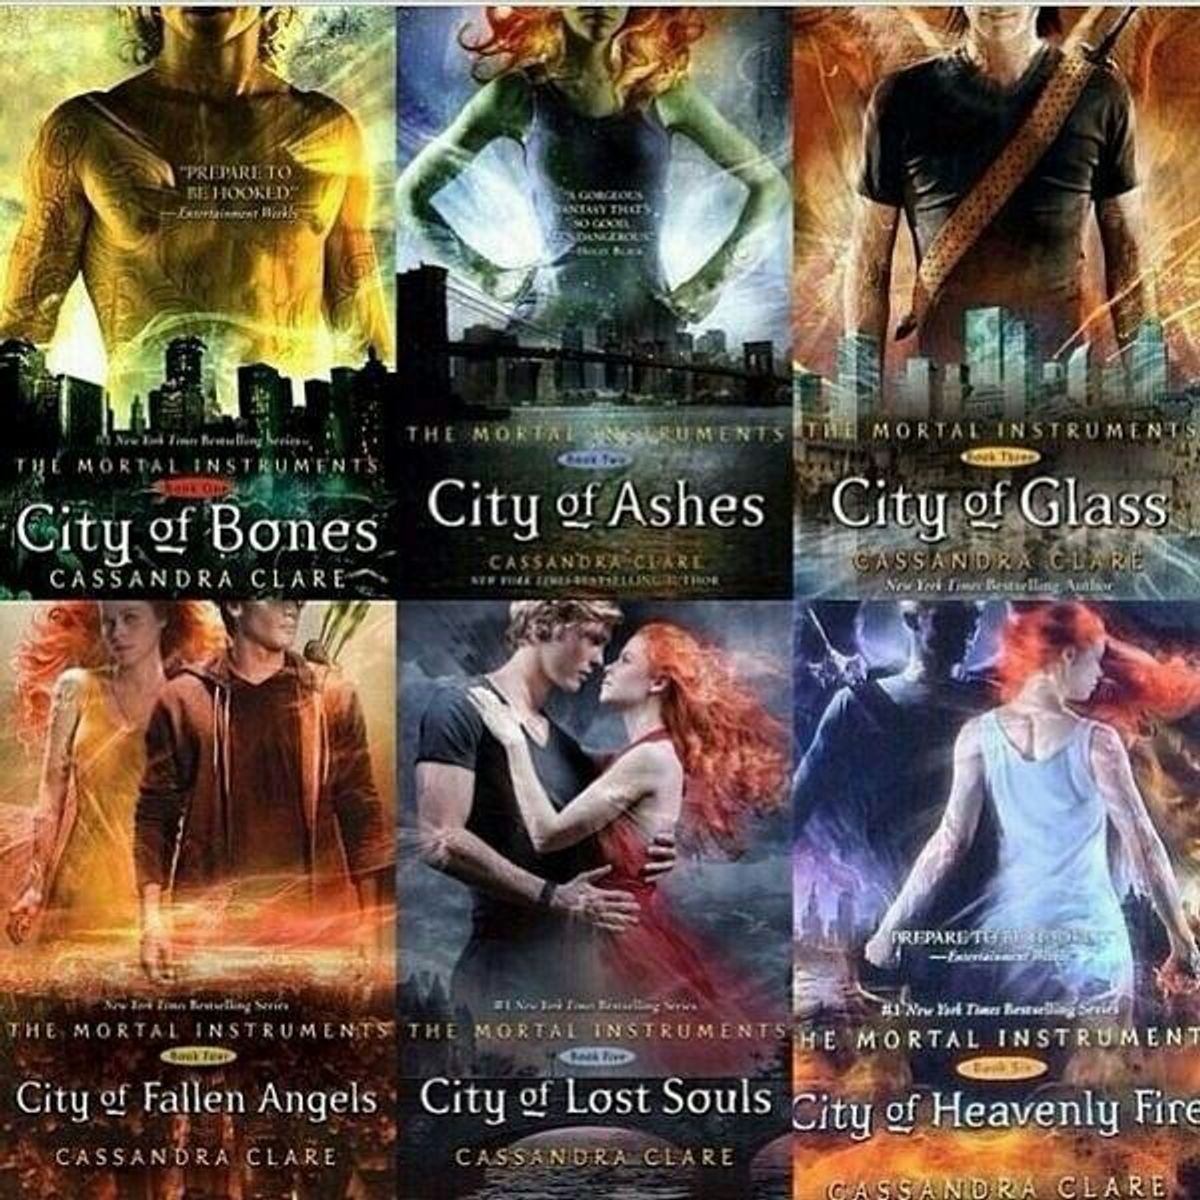 Why You Should Be Reading Cassandra Clare's Books